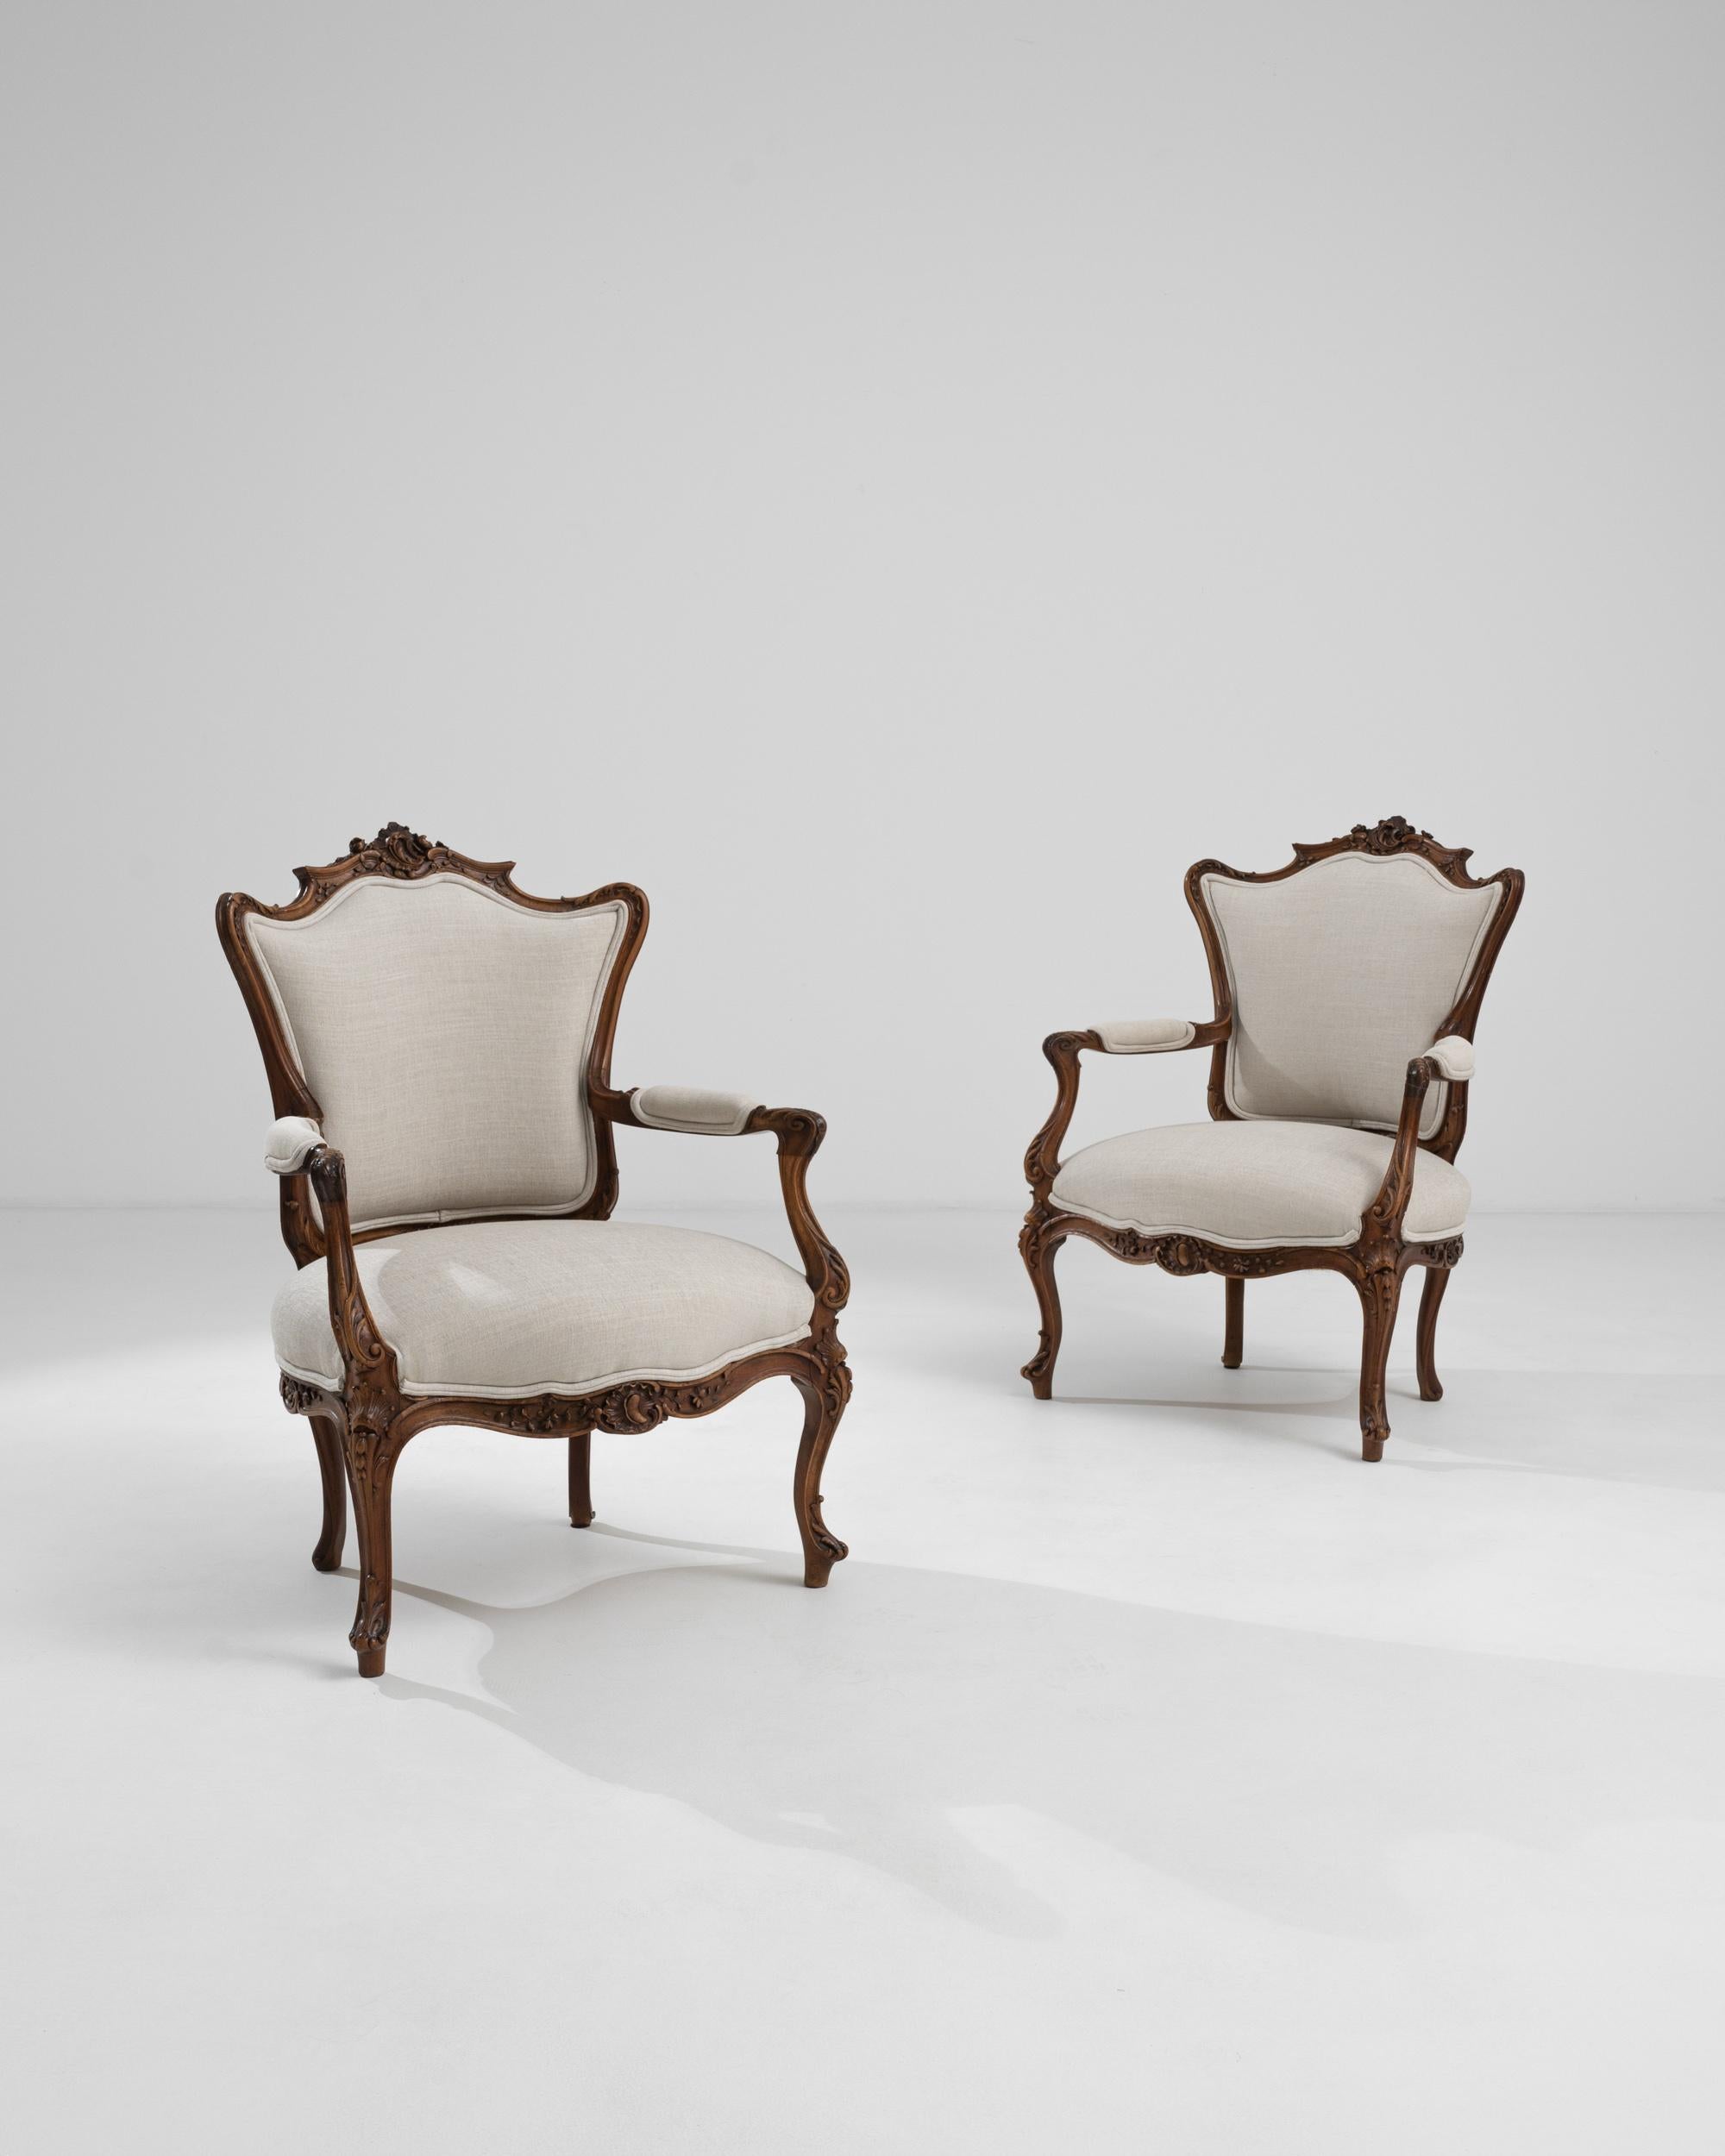 A pair of 19th century French wooden armchairs with upholstered seats and backs. A warm and pleasing glow emits from the rich brown wood that composes these elegant chairs. Sumptuous carved scroll patterning is given revitalized synergy thanks to